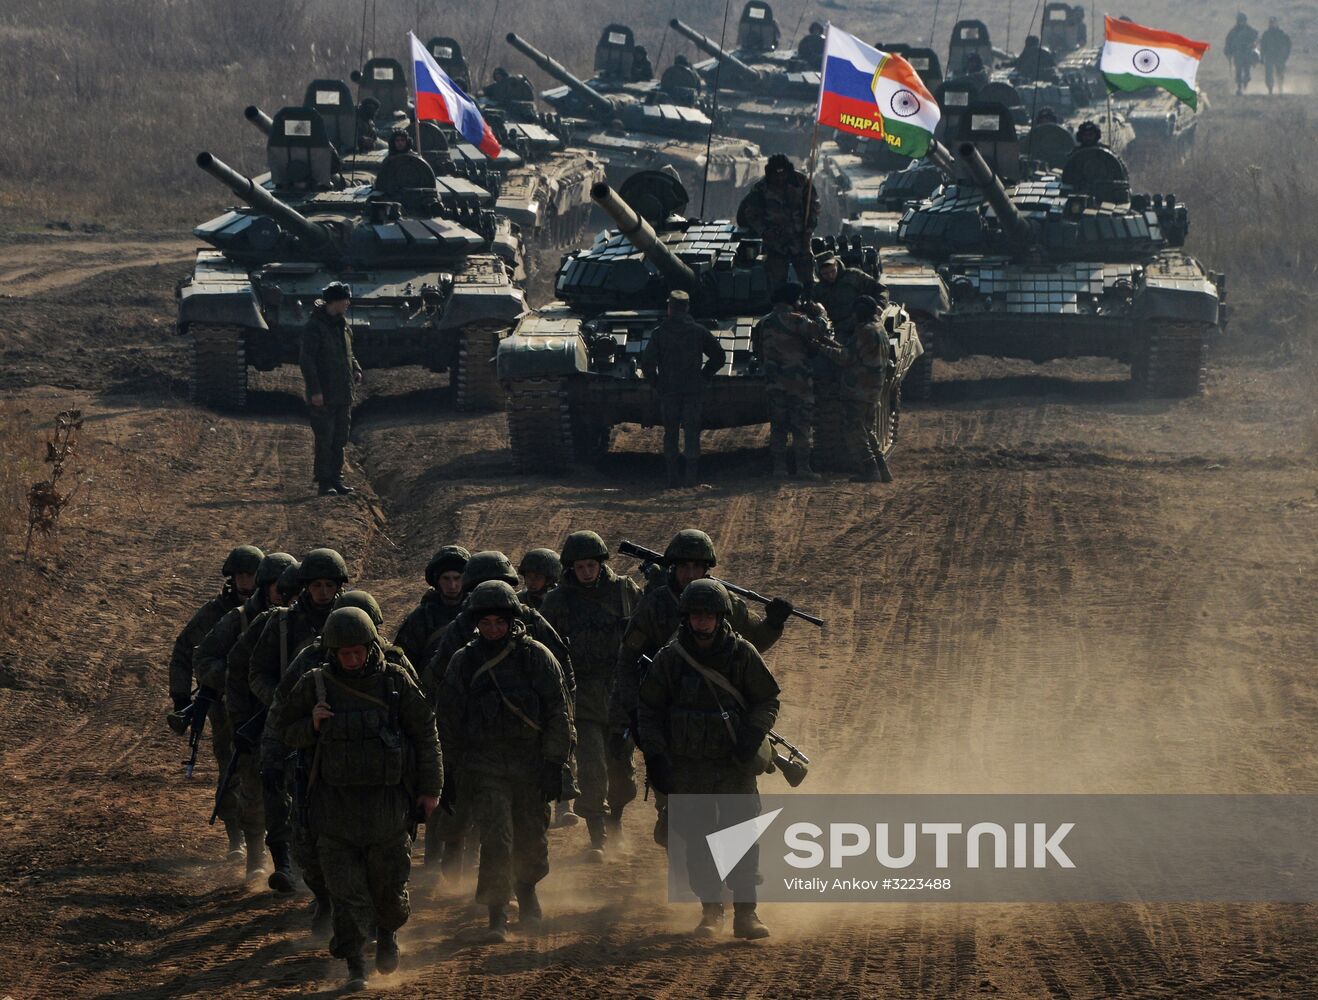 Russian-Indian joint military exercises Indra-2017